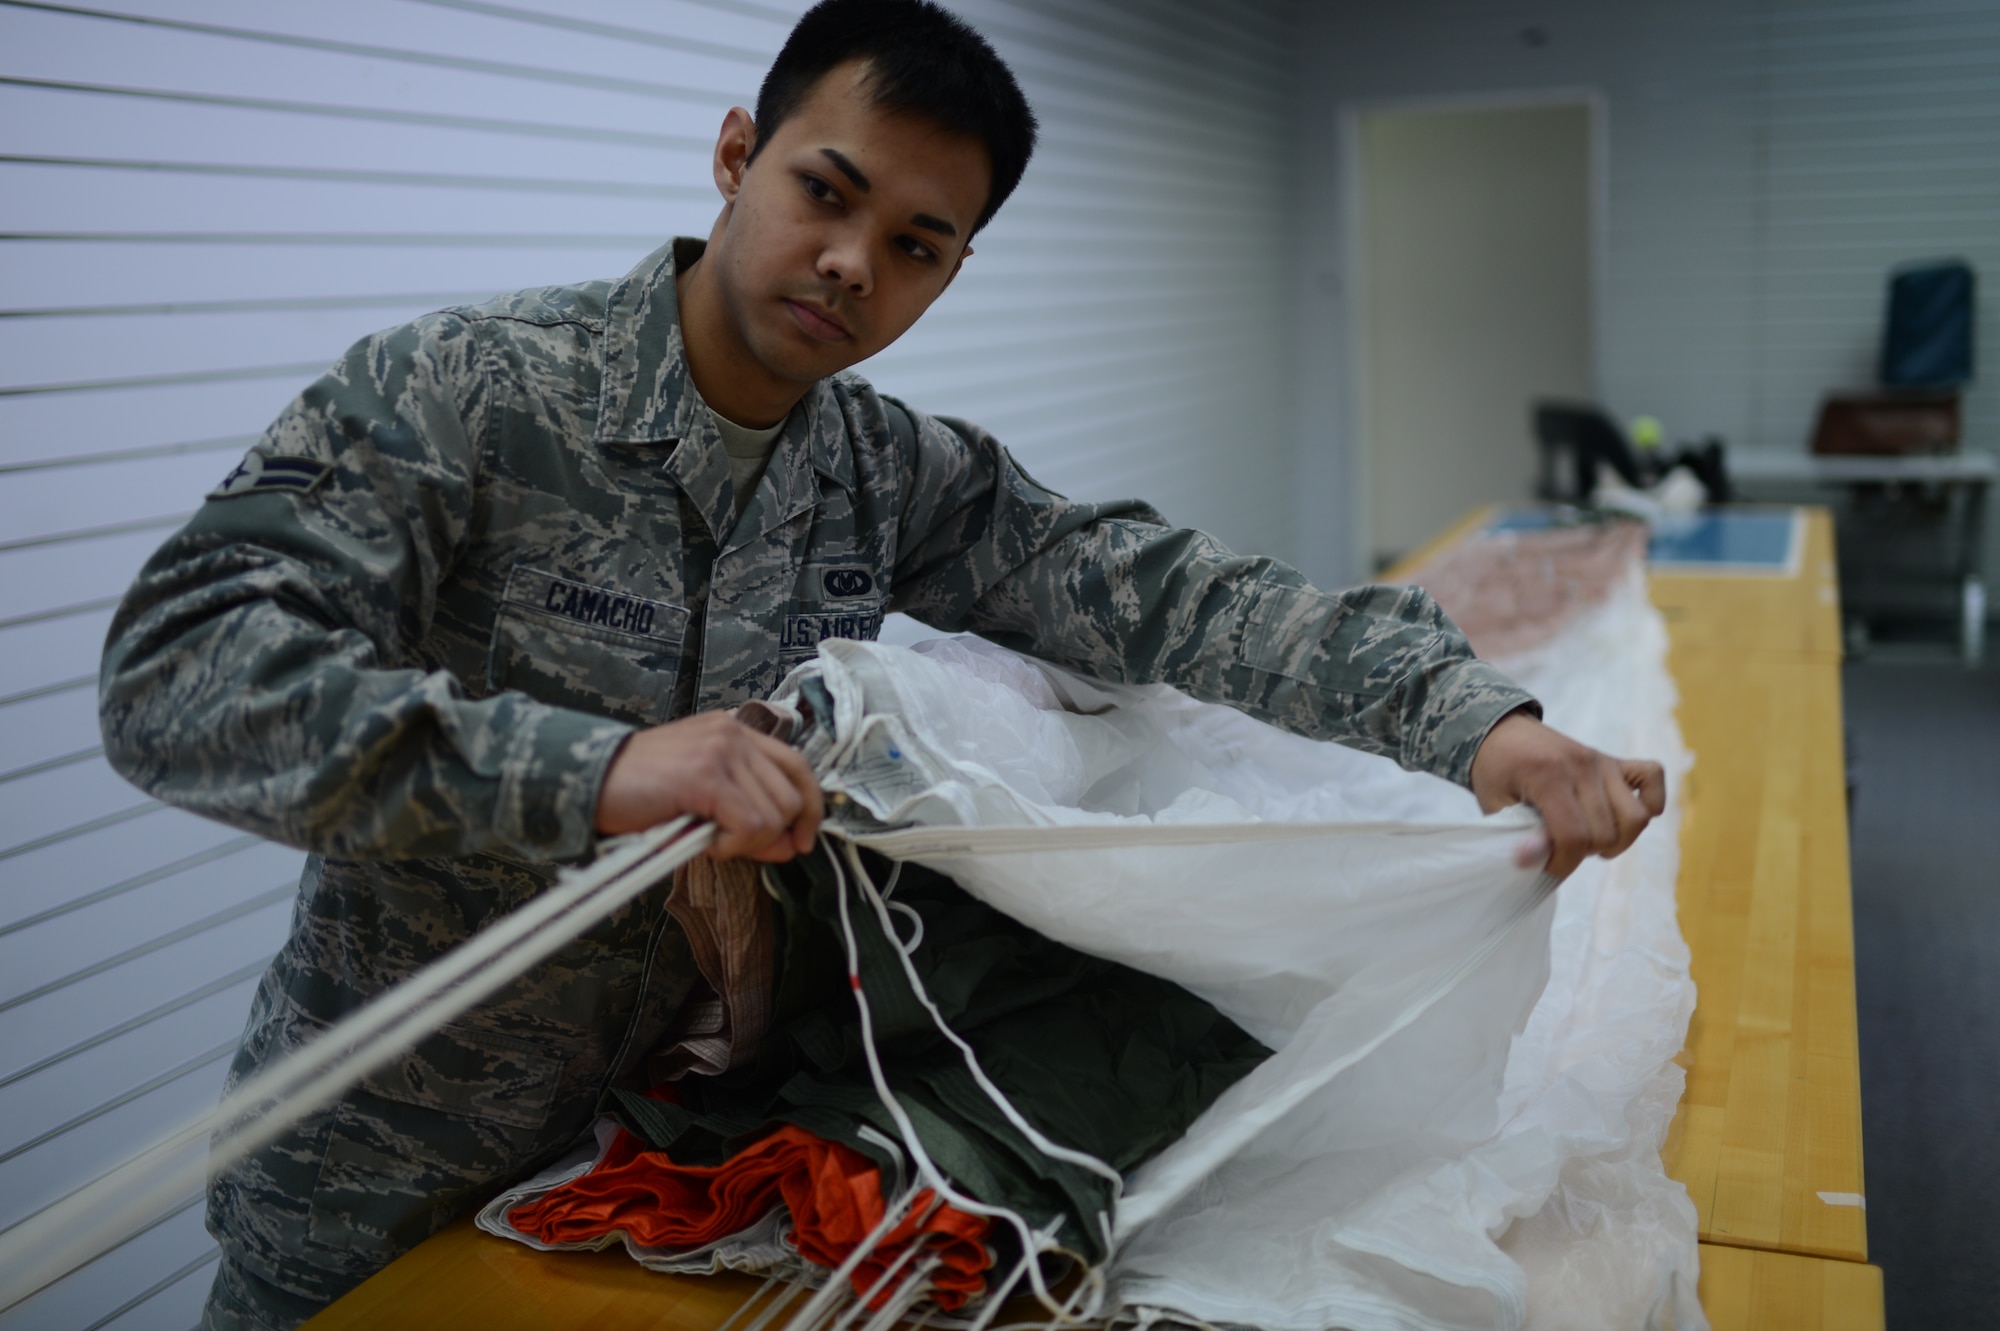 U.S. Air Force Airman 1st Class Timothy Camacho, 52nd Operations Support Squadron aircrew flight equipment technician from Guam, inspects a parachute at Spangdahlem Air Base, Germany, Feb. 24, 2014. Flight equipment technicians check parachutes for rips, tears and imperfections once a year. (U.S. Air Force photo by Senior Airman Gustavo Castillo/Released)